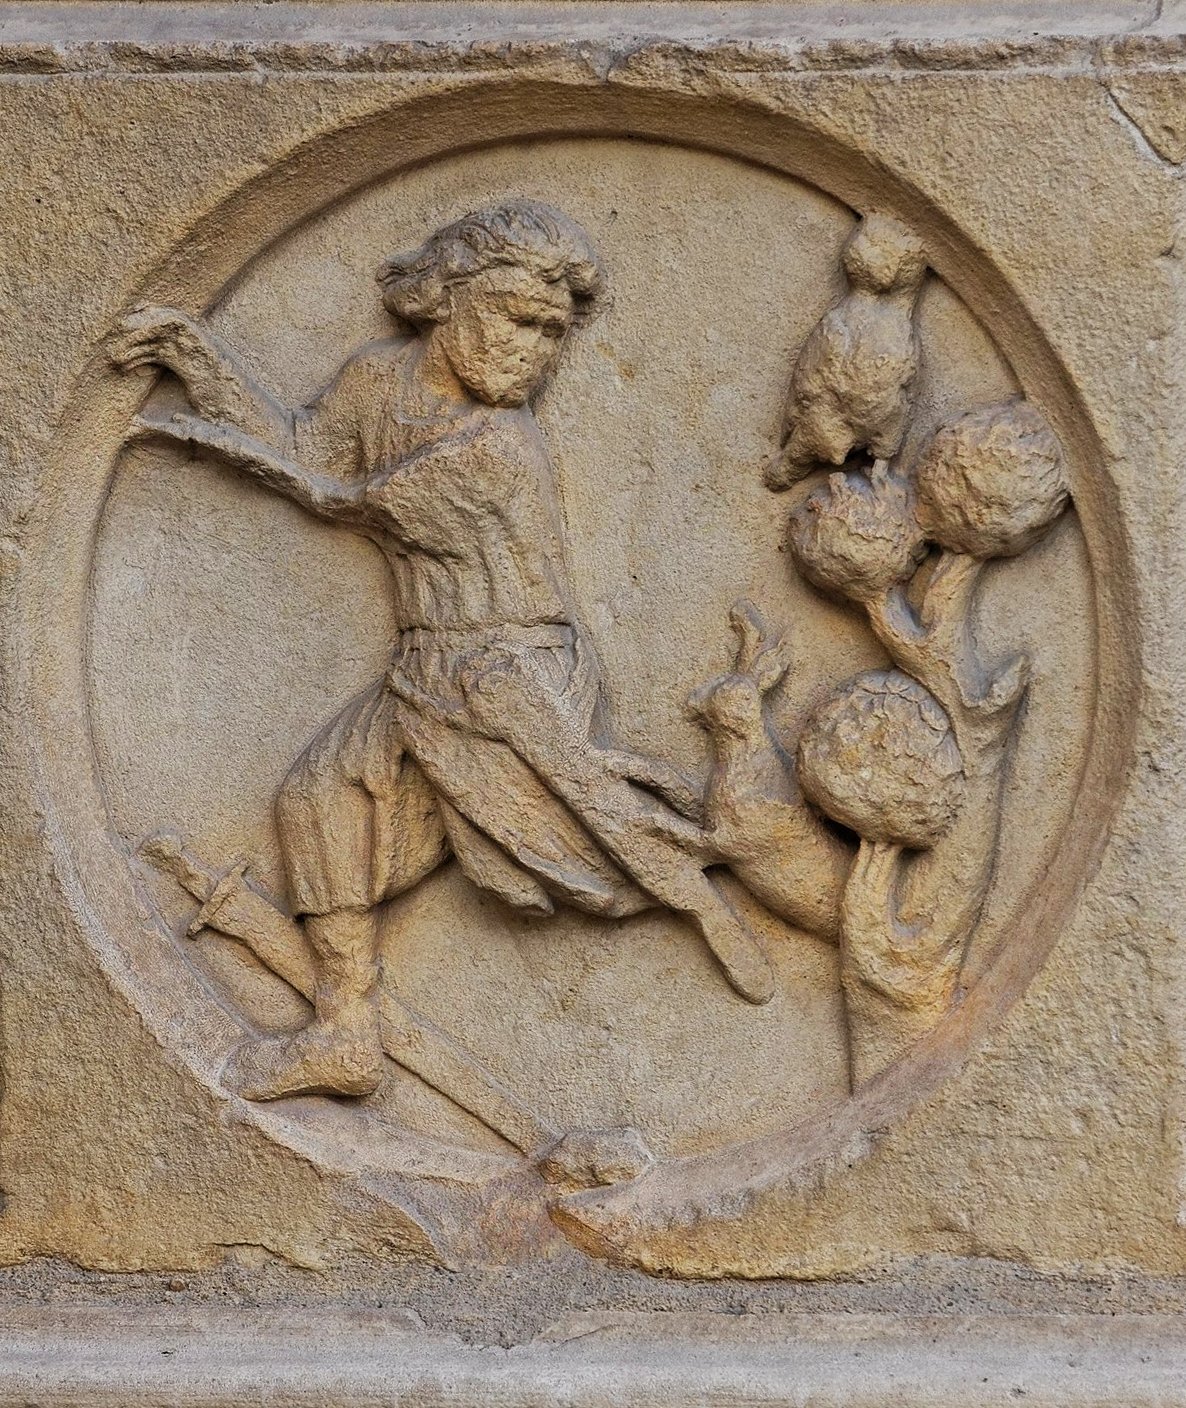 A stone relief sculpture of a knight on a Notre Dame de Paris façade running away from a rabbit. The sculpture is old and has some cracks and chips in it.